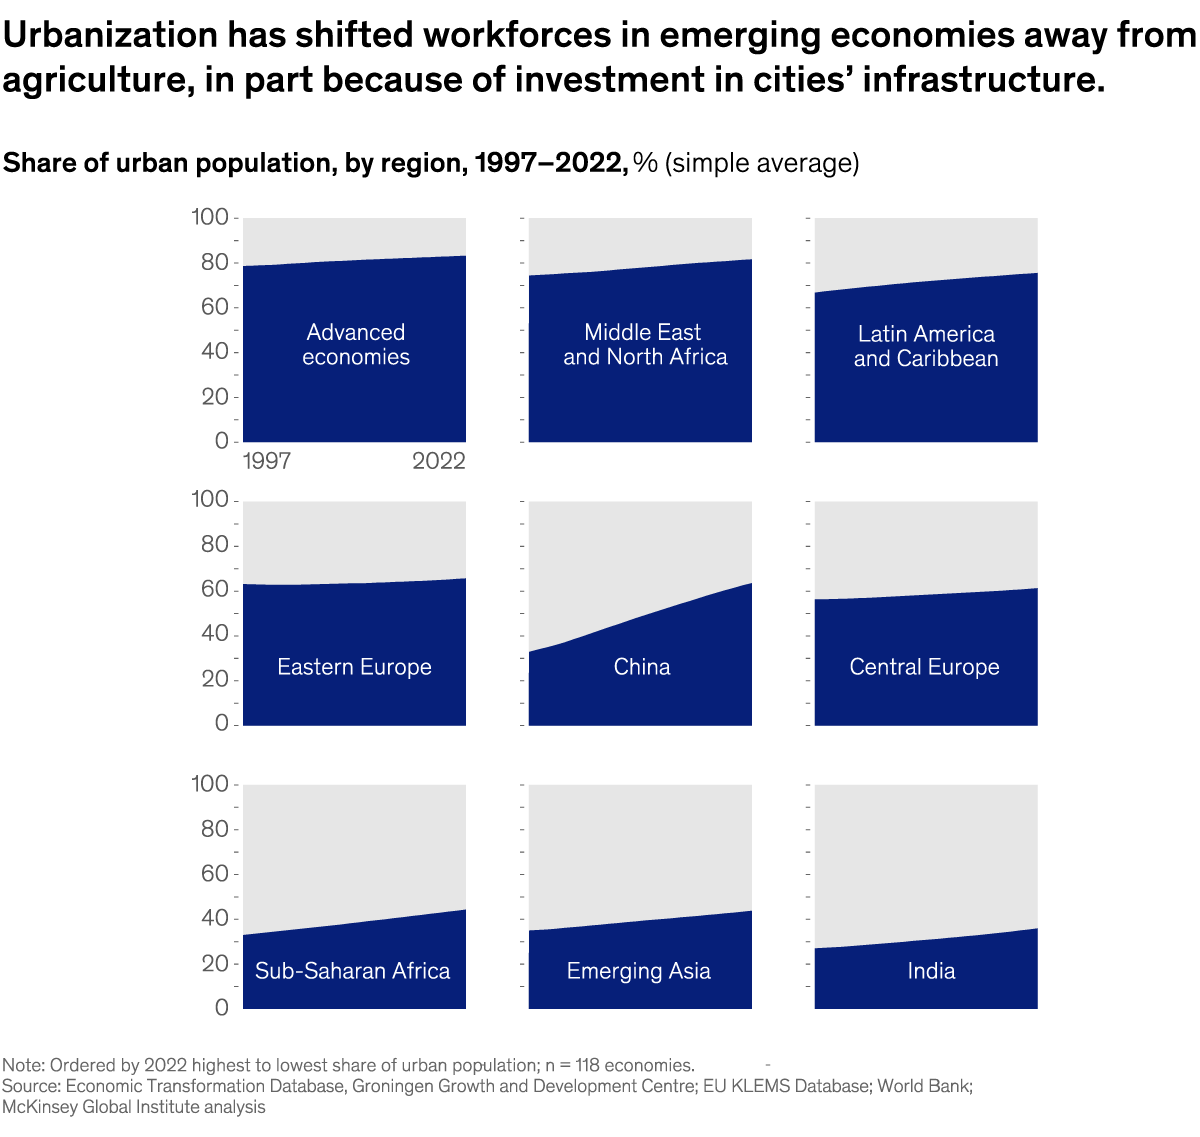 A chart titled “Urbanization has shifted workforces in emerging economies away from agriculture, in part because of investment in cities' infrastructure.” Click to open the full article on McKinsey.com.